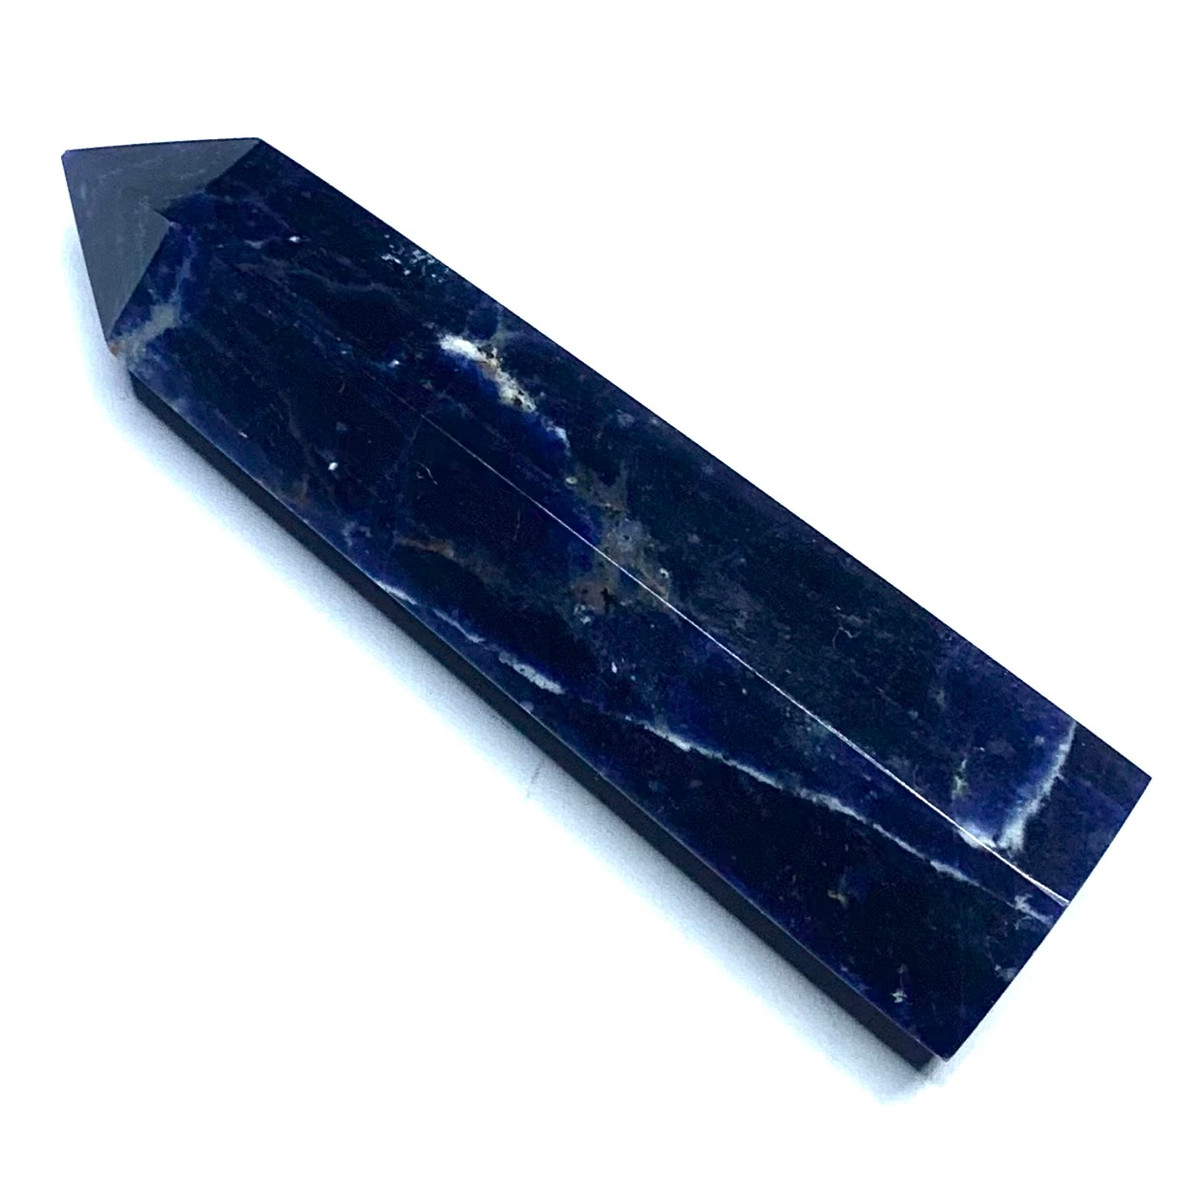 One of a Kind Sodalite Tower Stone-2 3/4 x 3/4" (NC4703)